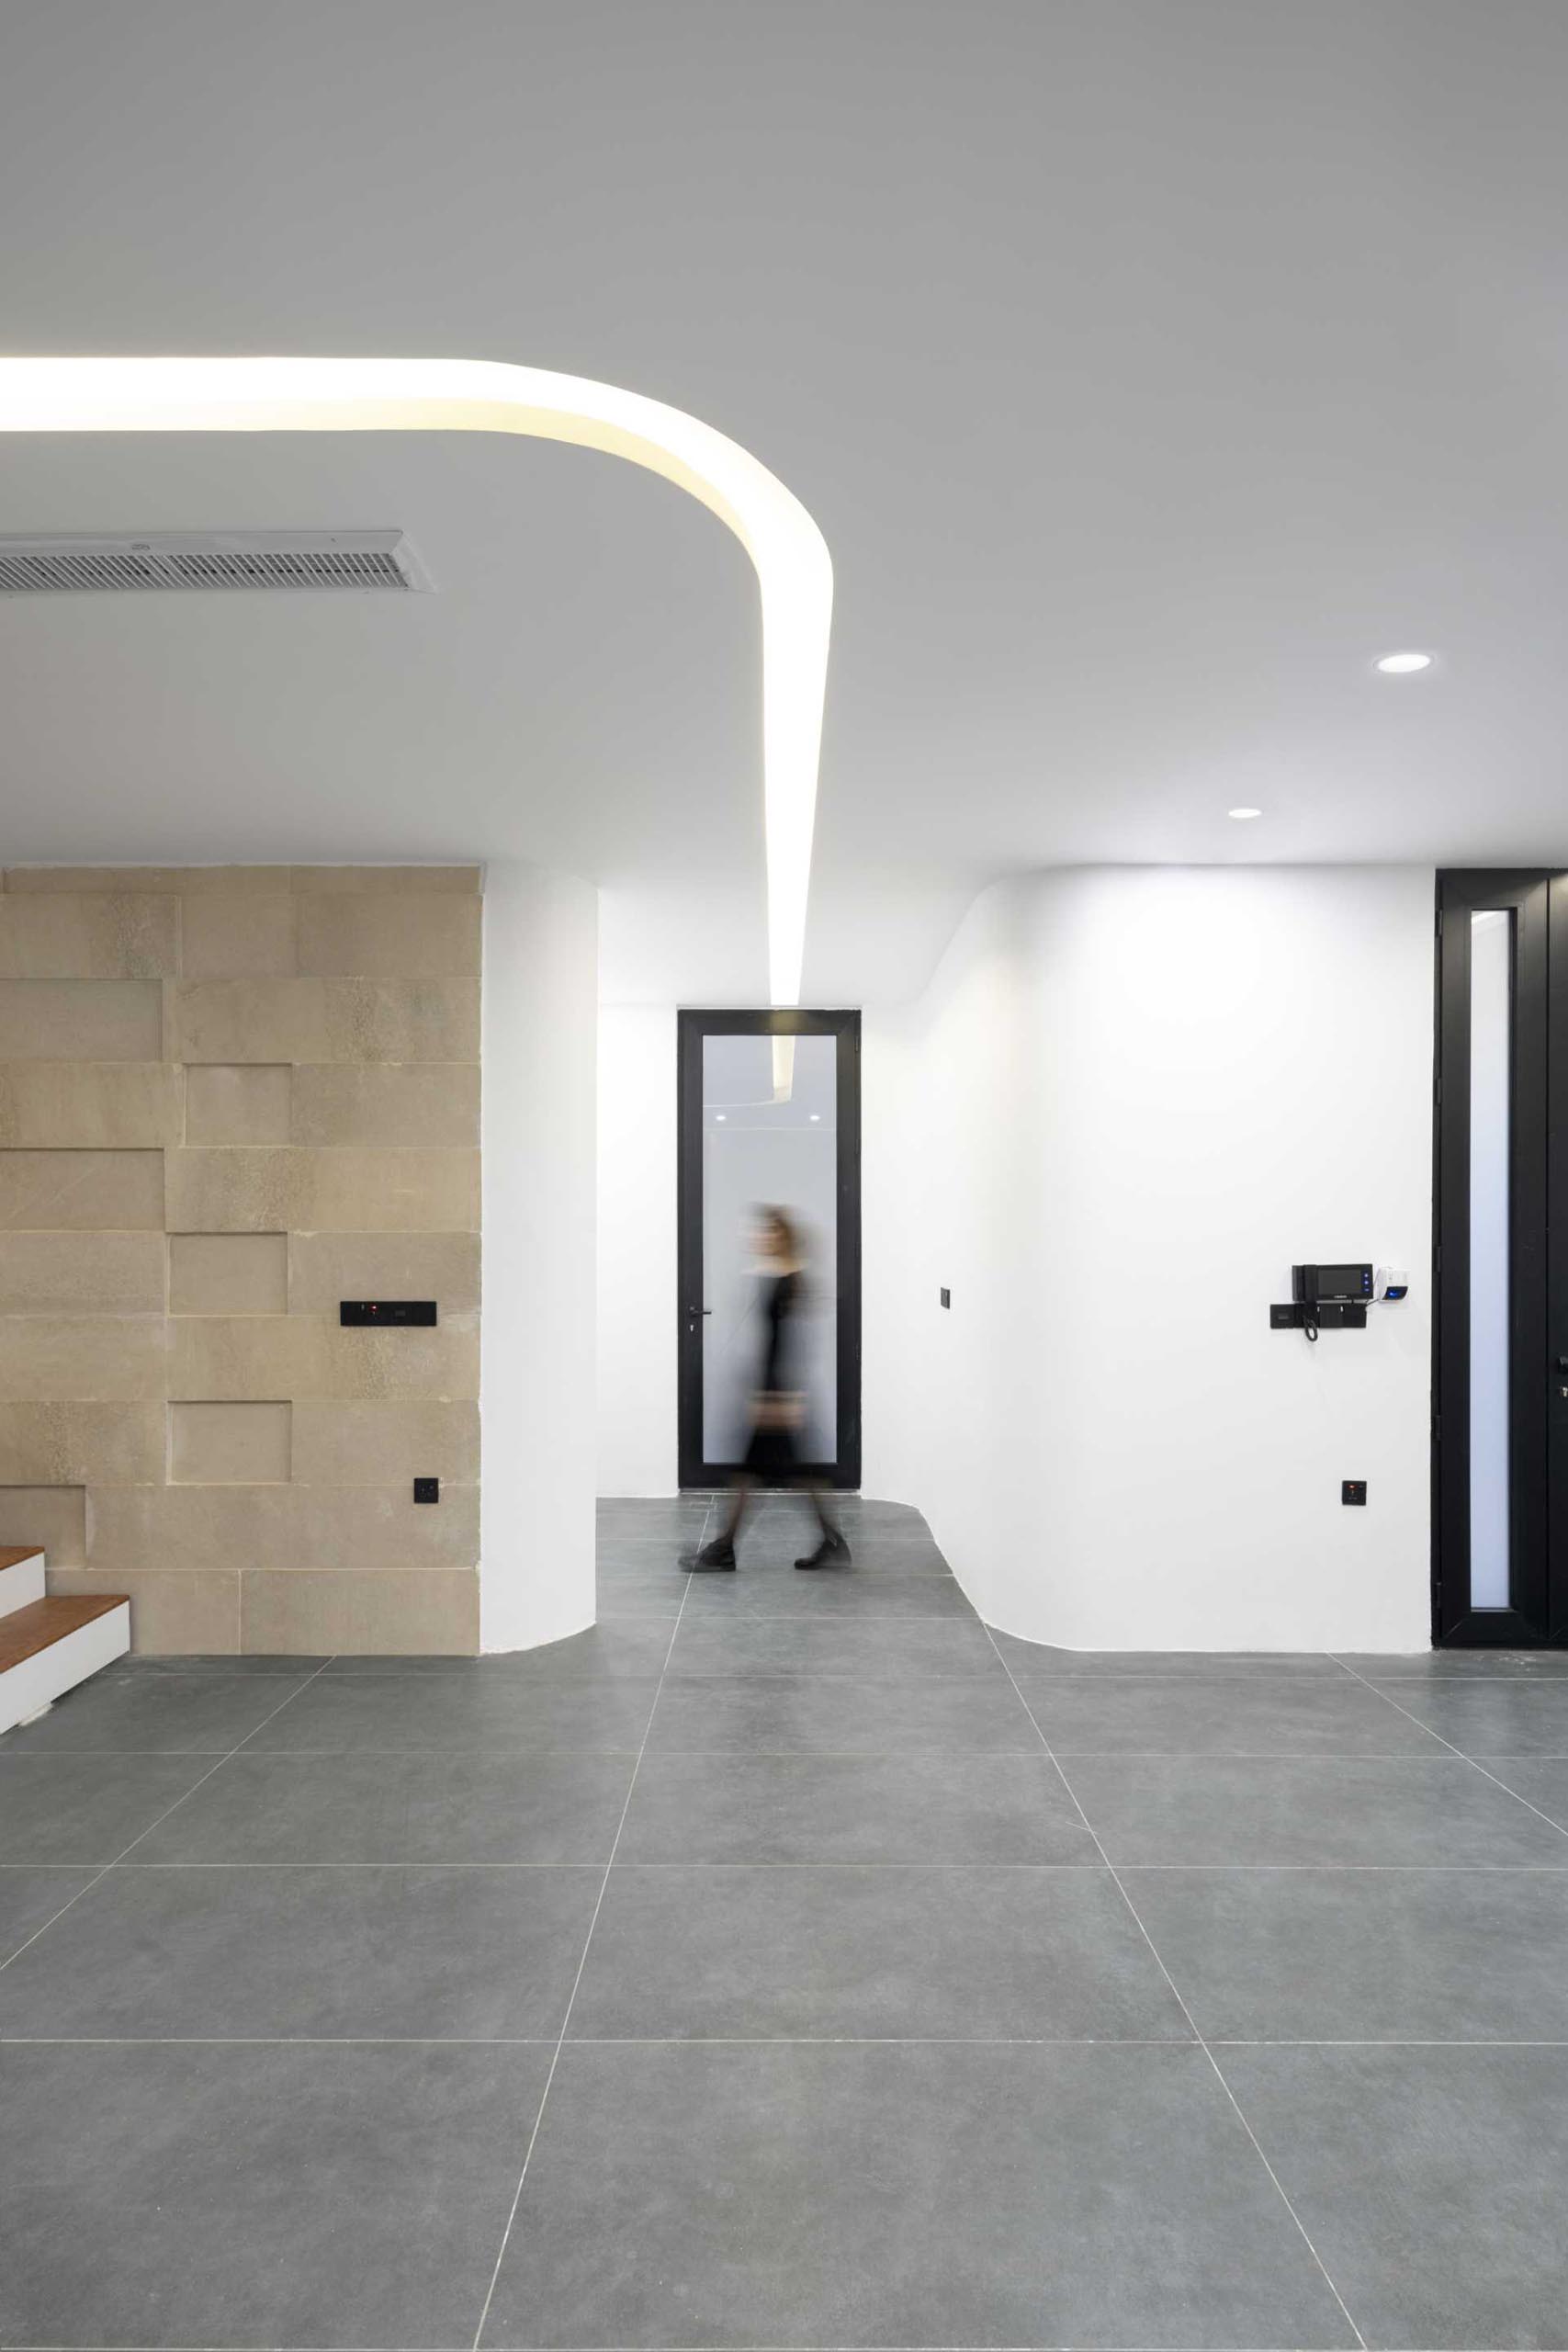 A modern house with grey tile flooring and curved lighting.